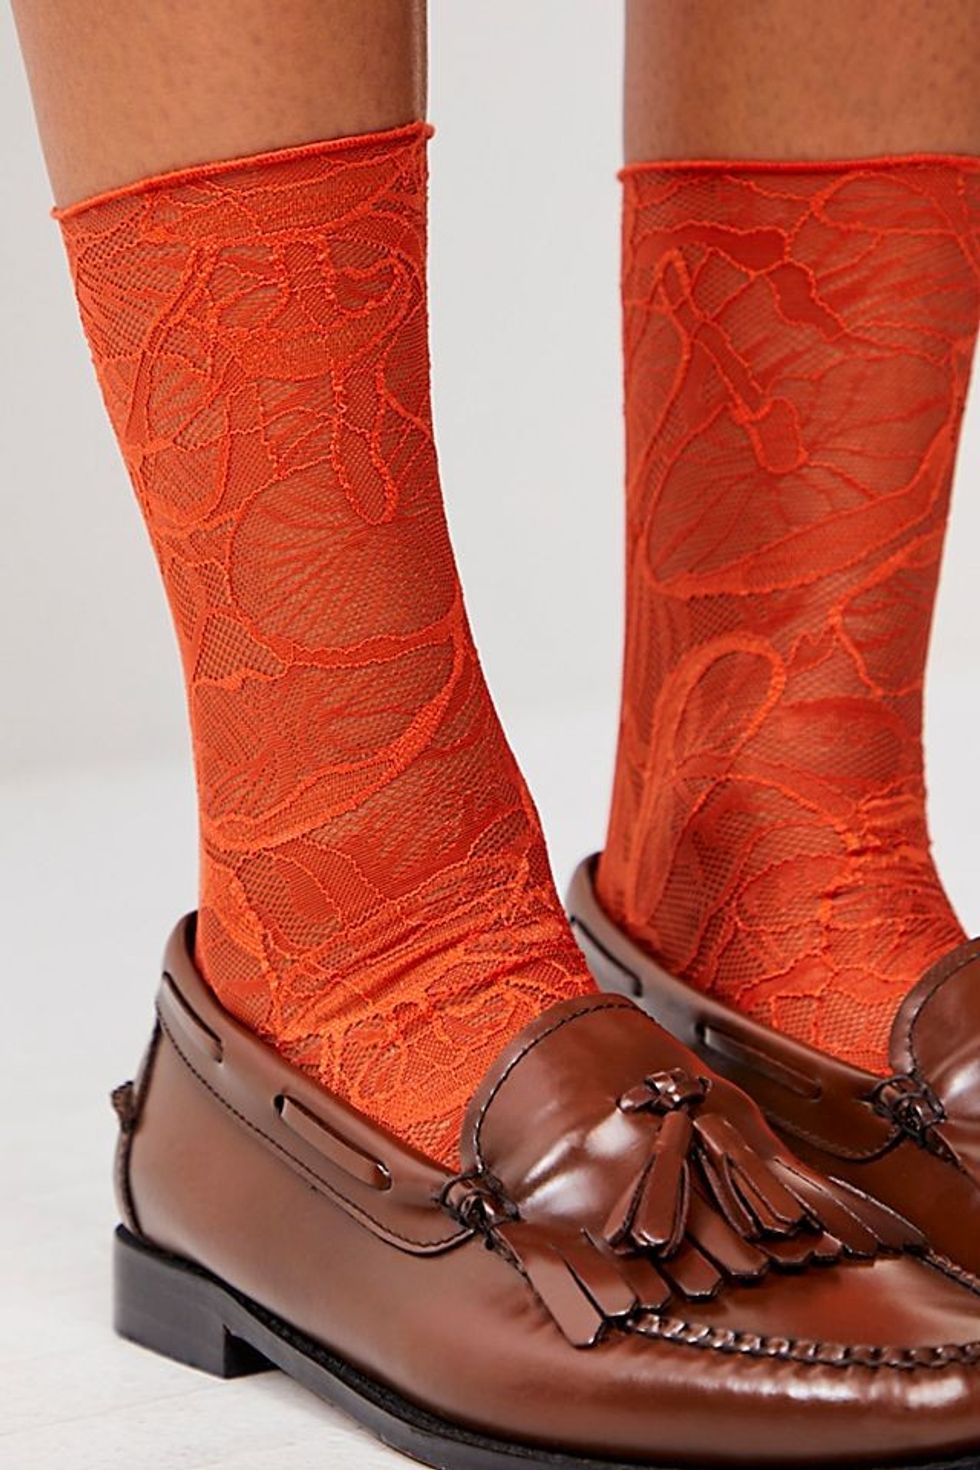 All Only Hearts Go Ask Alice Lace Socks